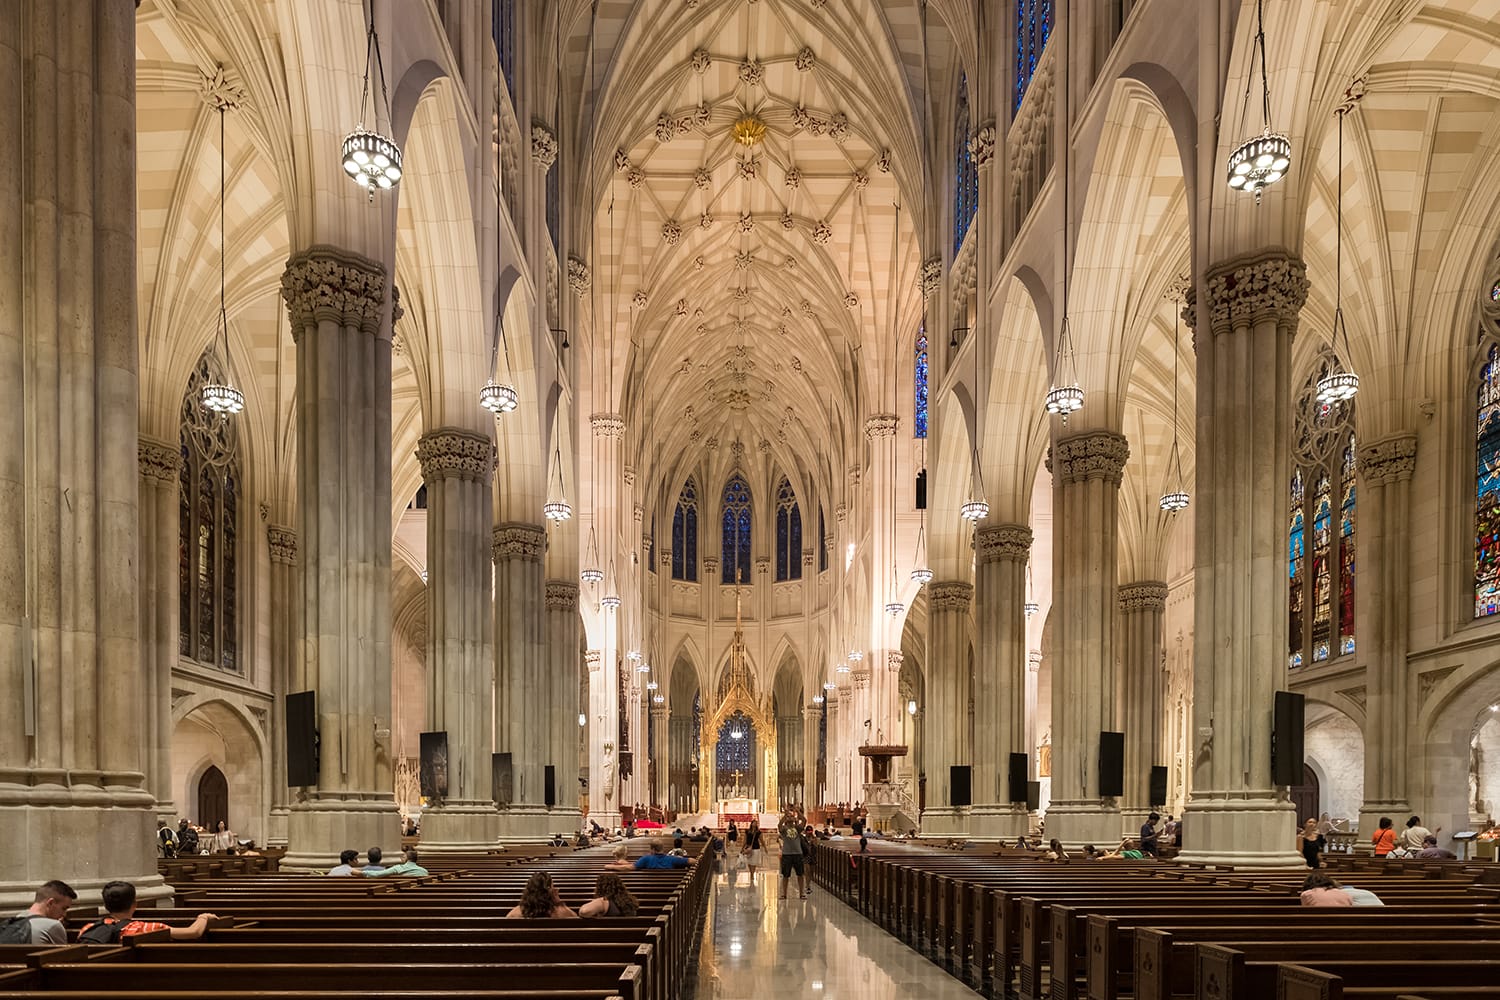 Interior of Saint Patrick's Cathedral in New York City, USA